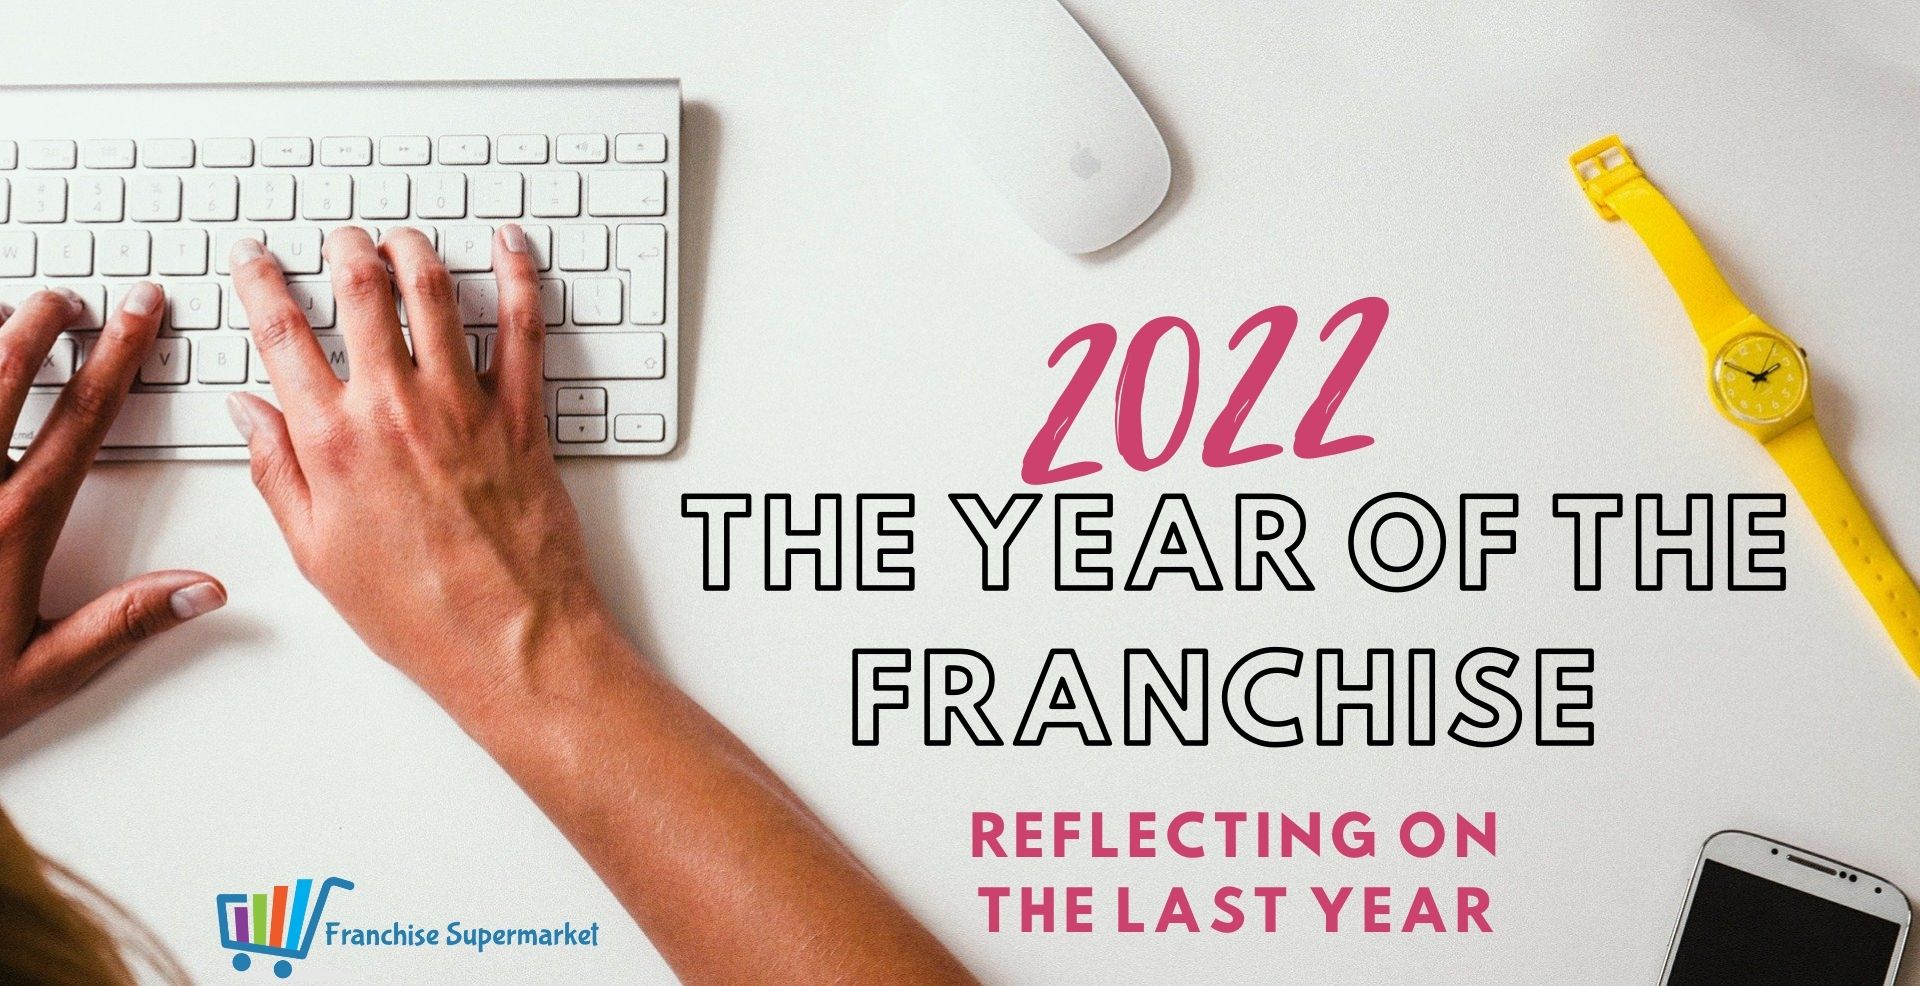 2022 - the year of the franchise